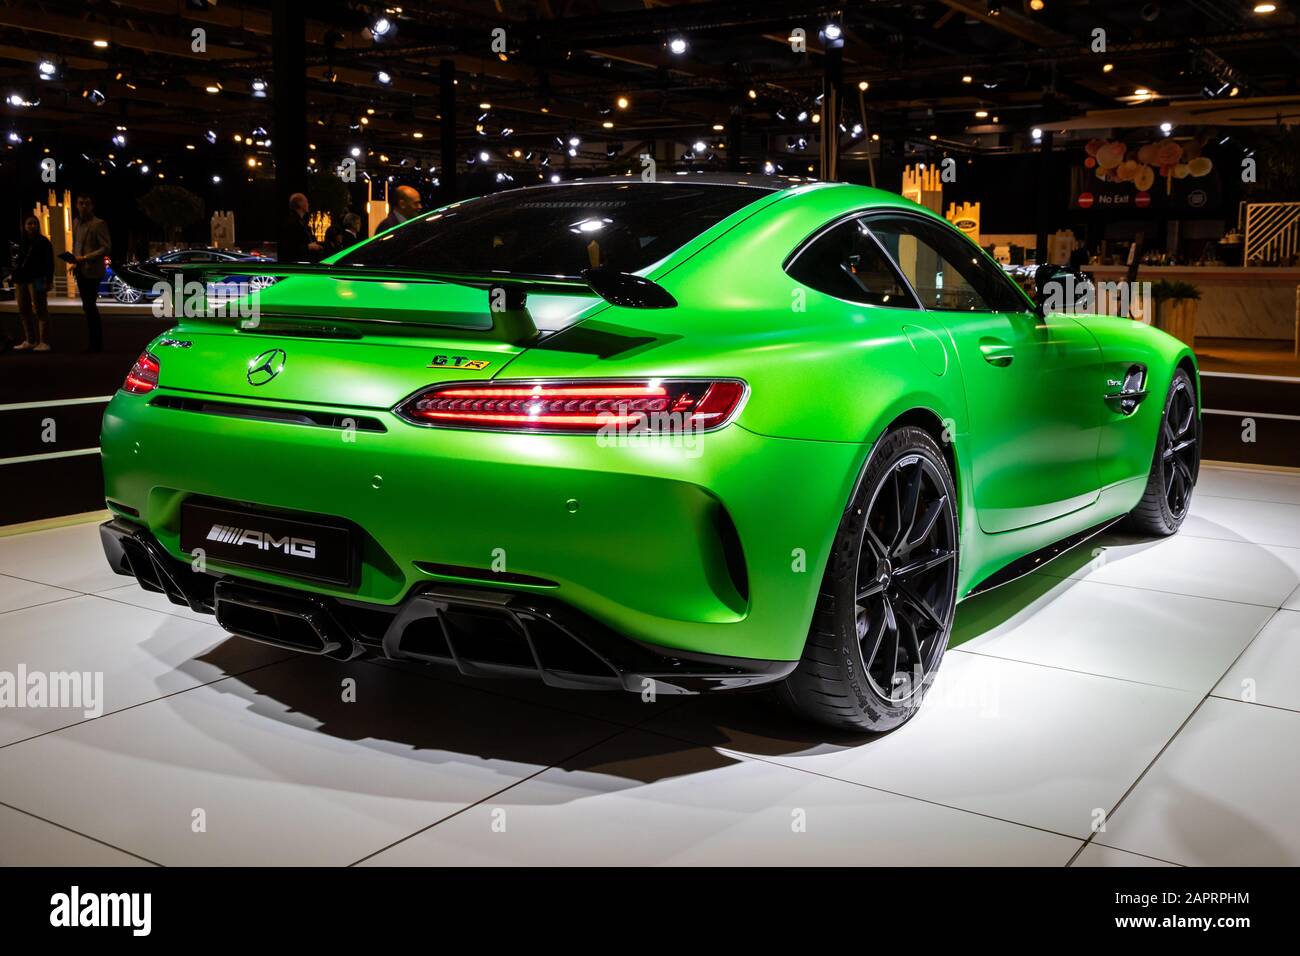 BRUSSELS - JAN 9, 2020: Mercedes-AMG GT R Coupe sports car showcased at the Brussels Autosalon 2020 Motor Show. Stock Photo